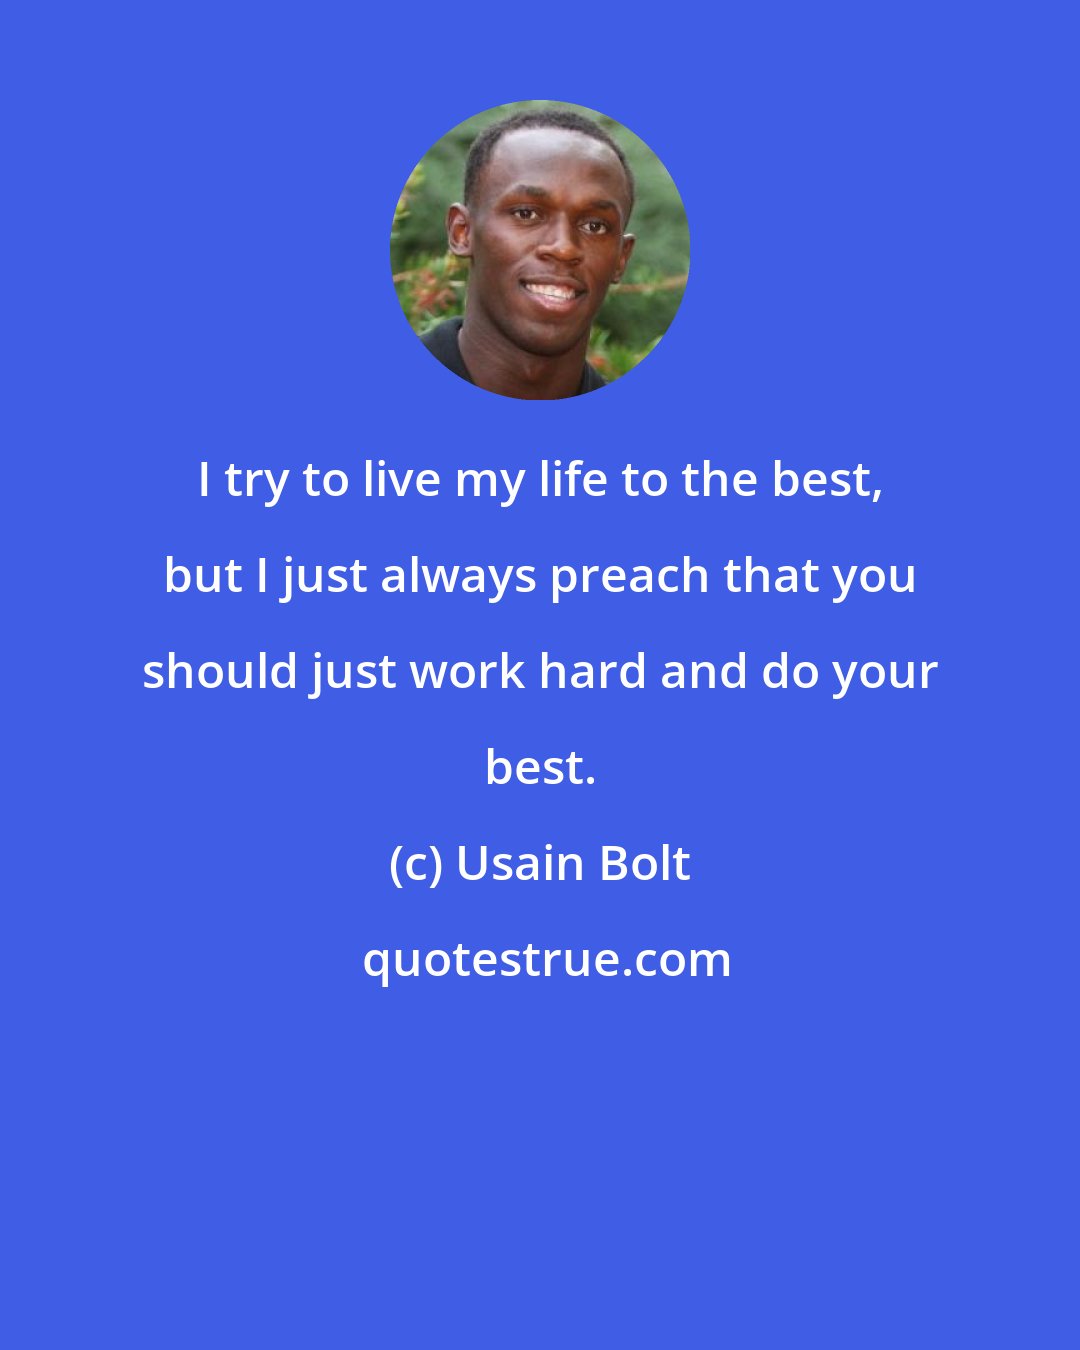 Usain Bolt: I try to live my life to the best, but I just always preach that you should just work hard and do your best.